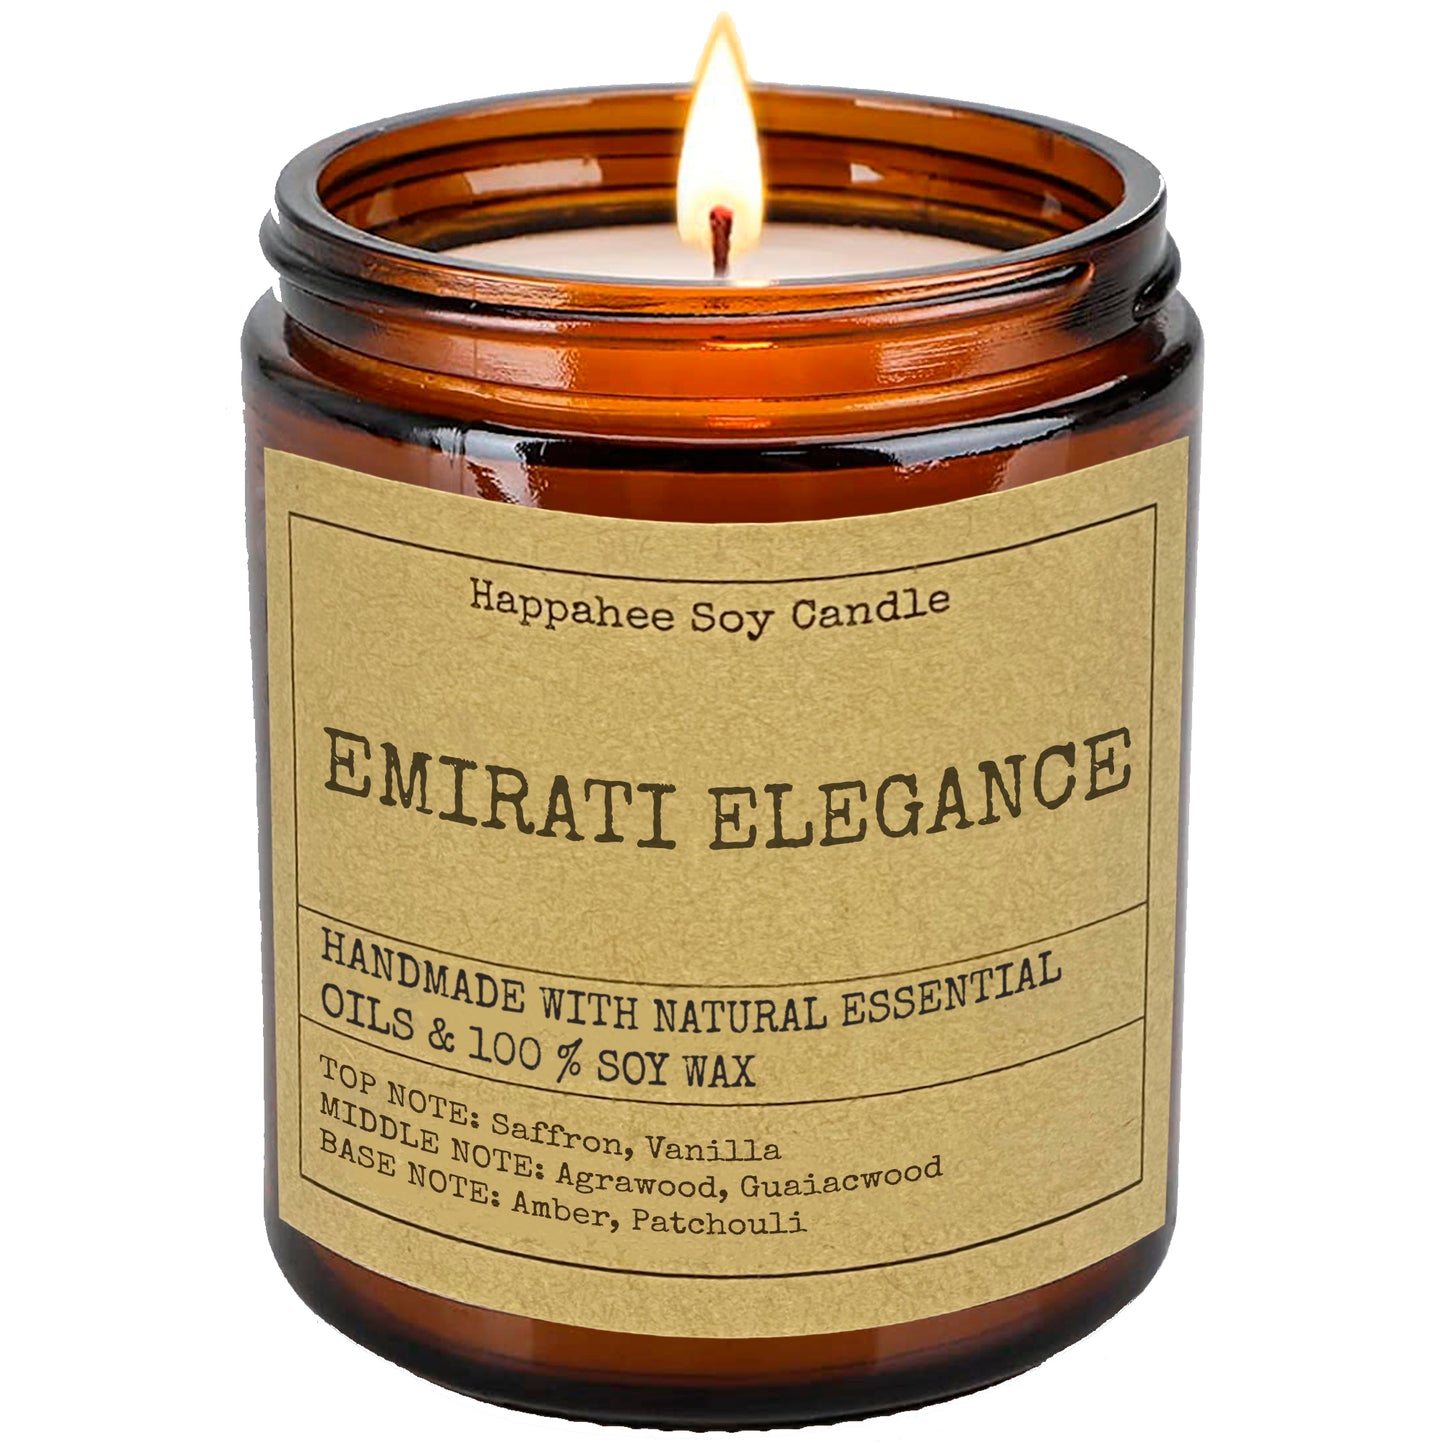 Handcrafted Emirati Elegance soy candle in an elegant amber glass jar, showcasing the natural and luxurious look of the candle.